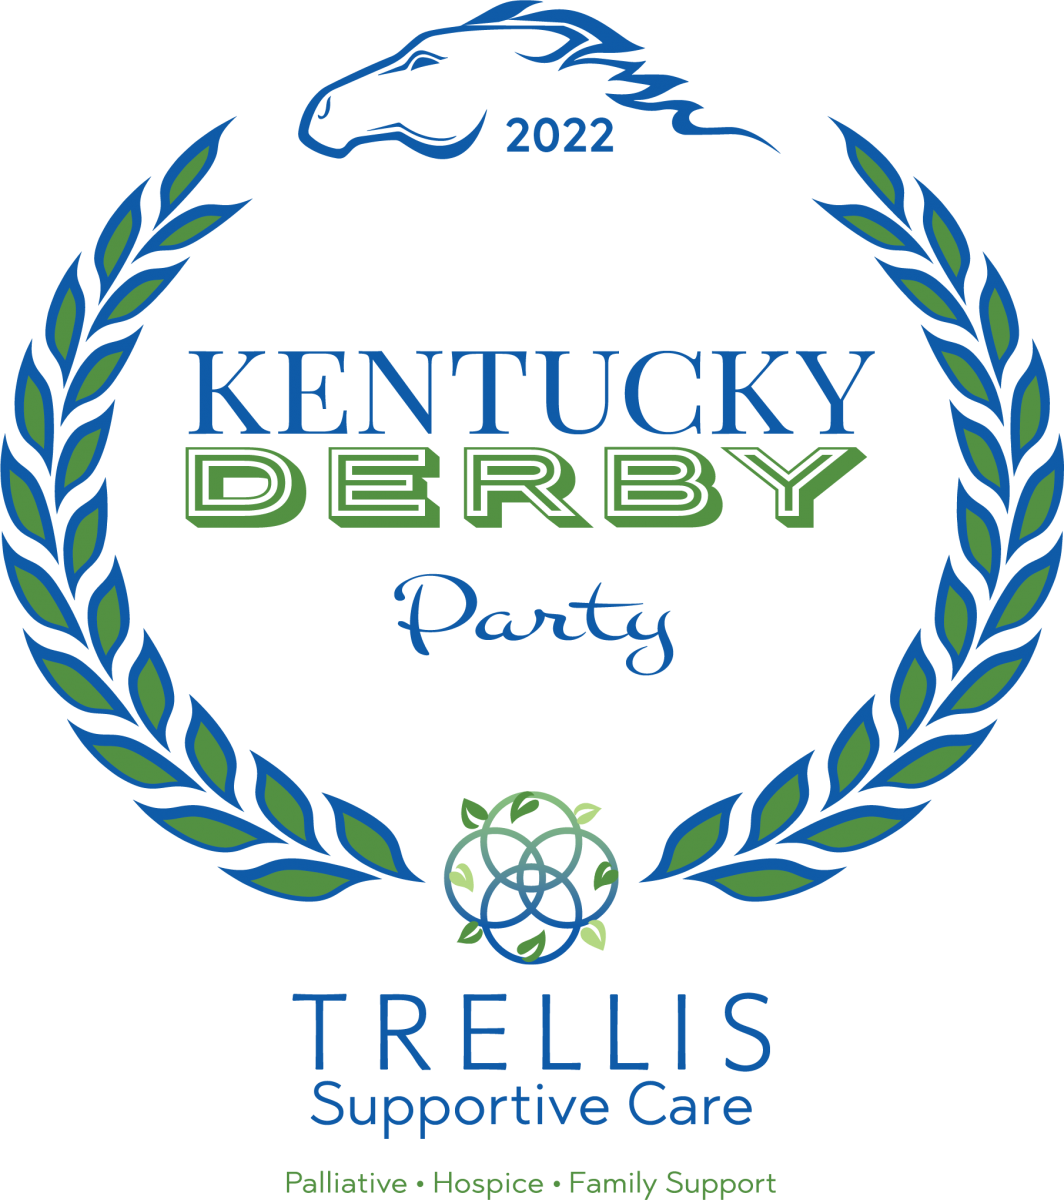 10th Annual Kentucky Derby Party Hospice & Palliative CareCenter is